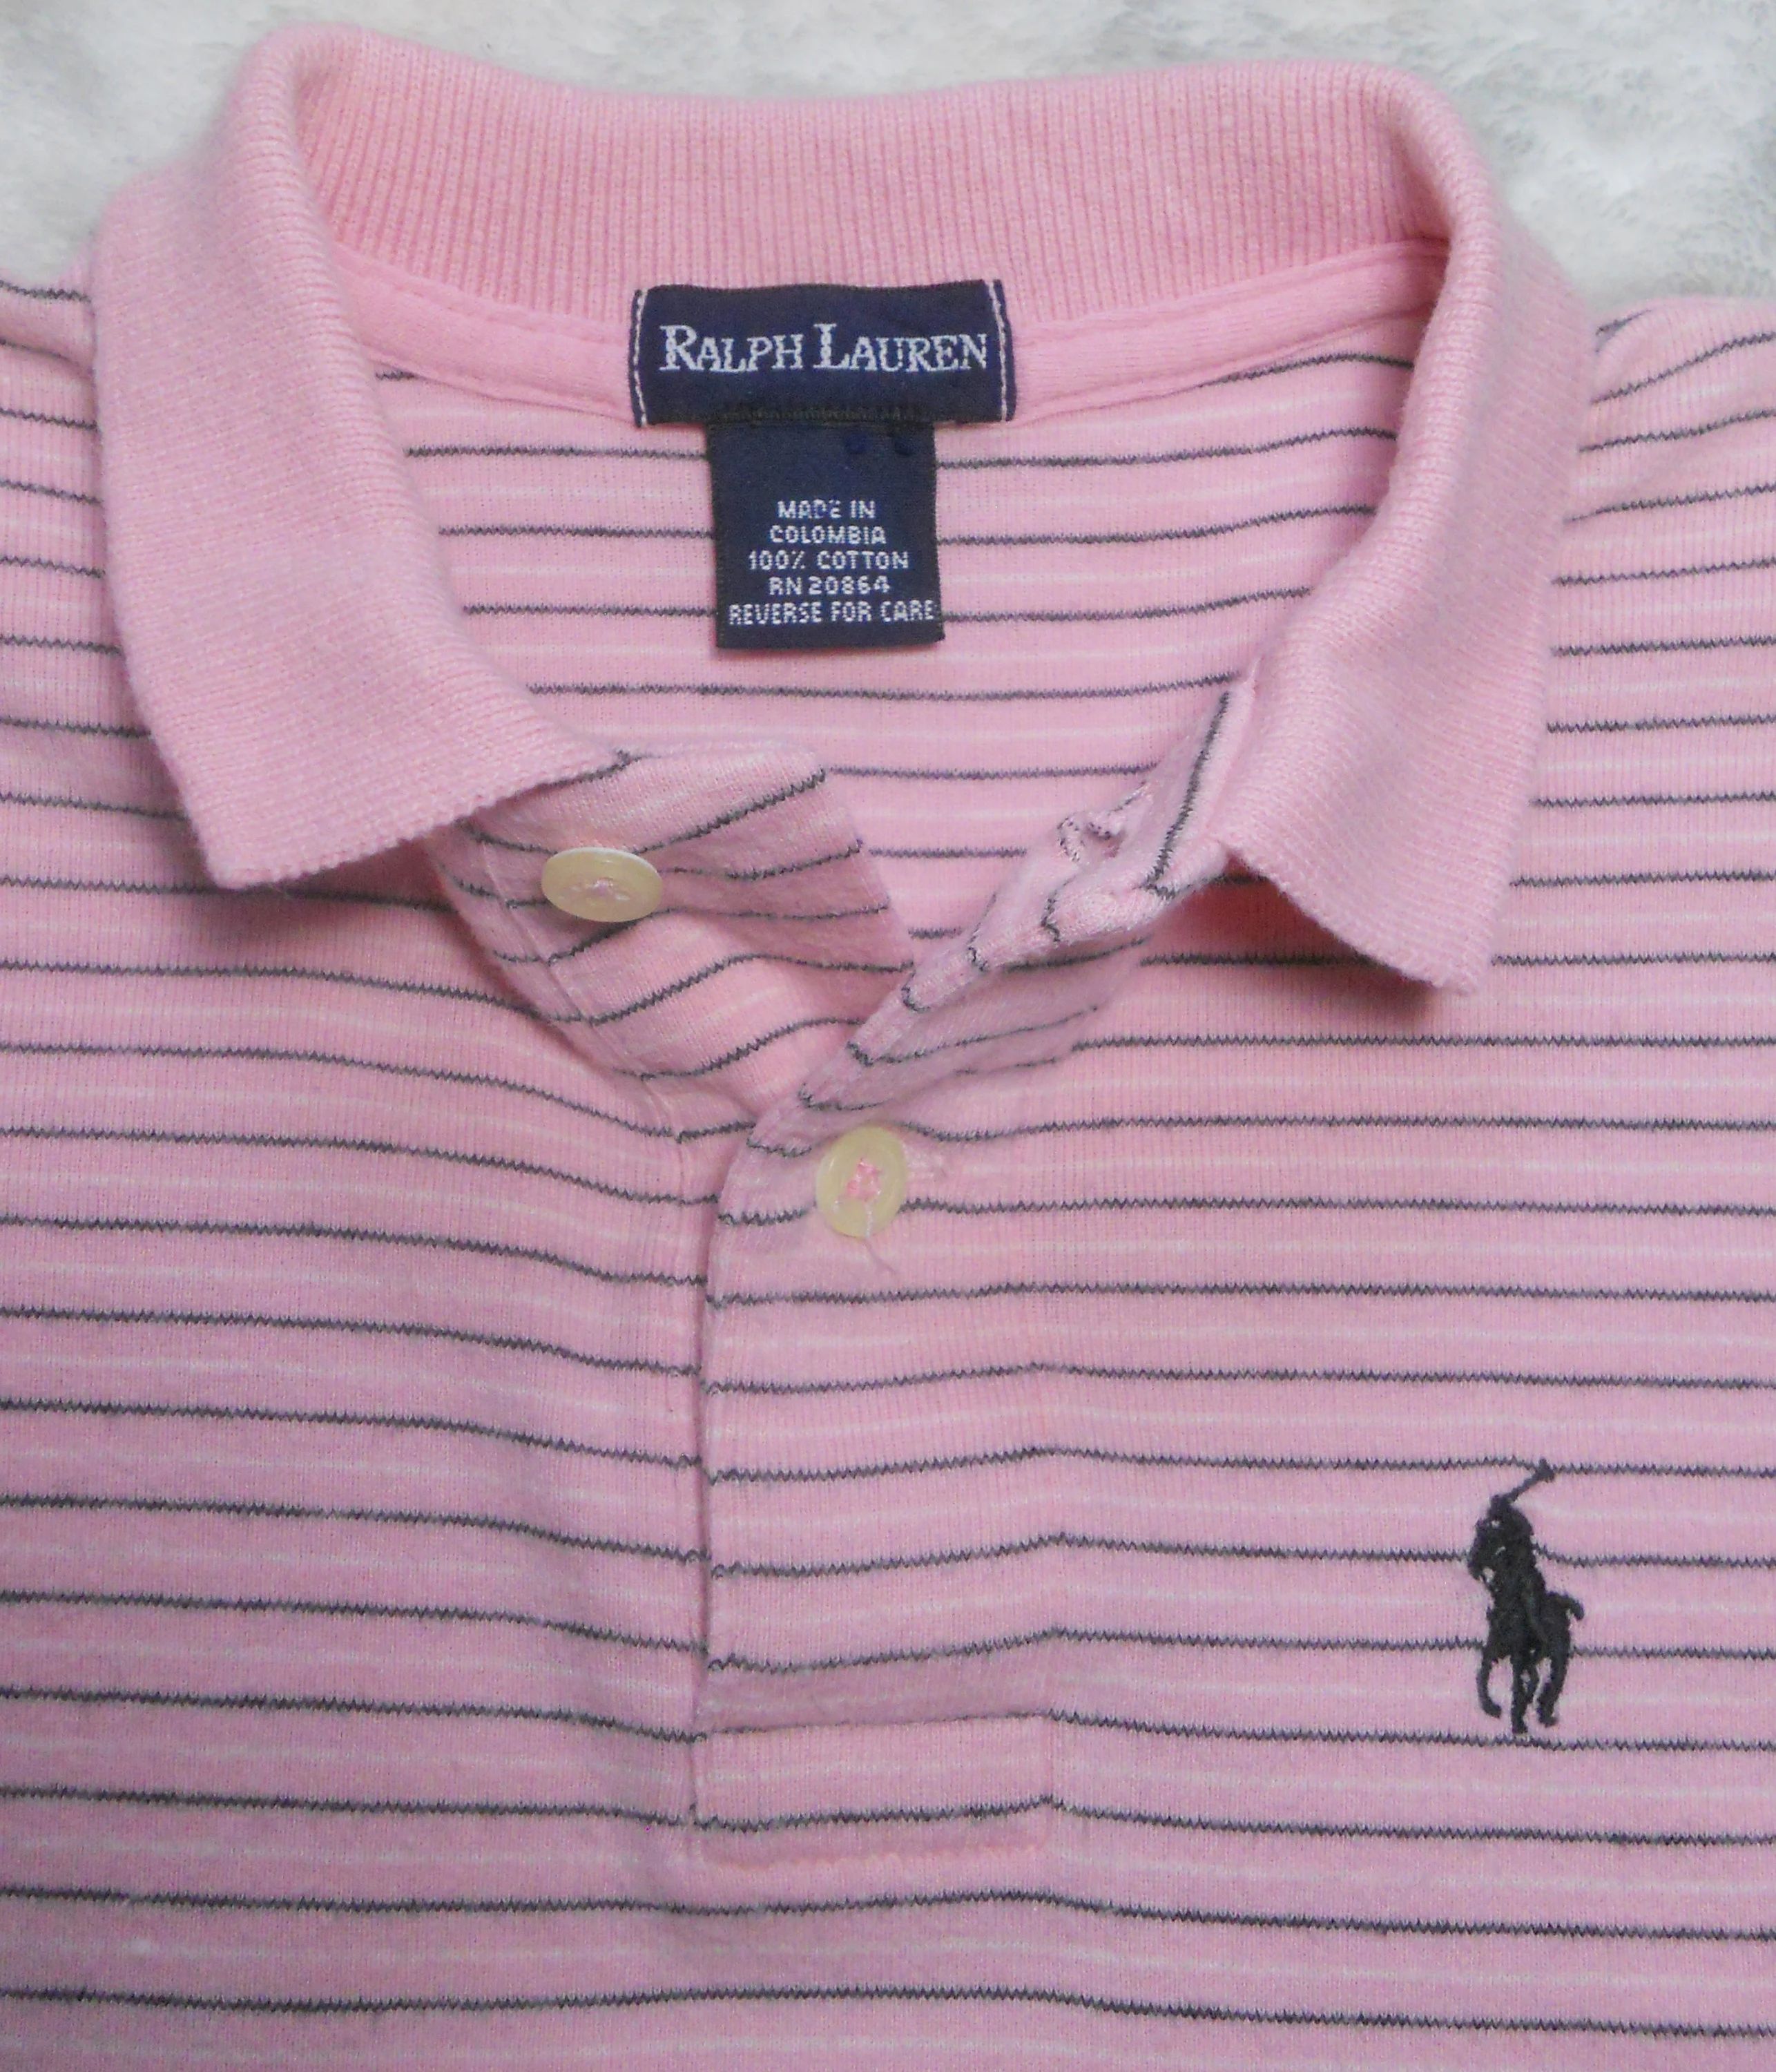 Tops: Vintage Ralph Lauren Short Sleeved POLO Shirt-Pink w/Navy striped All  cotton Girl Top 6-6X